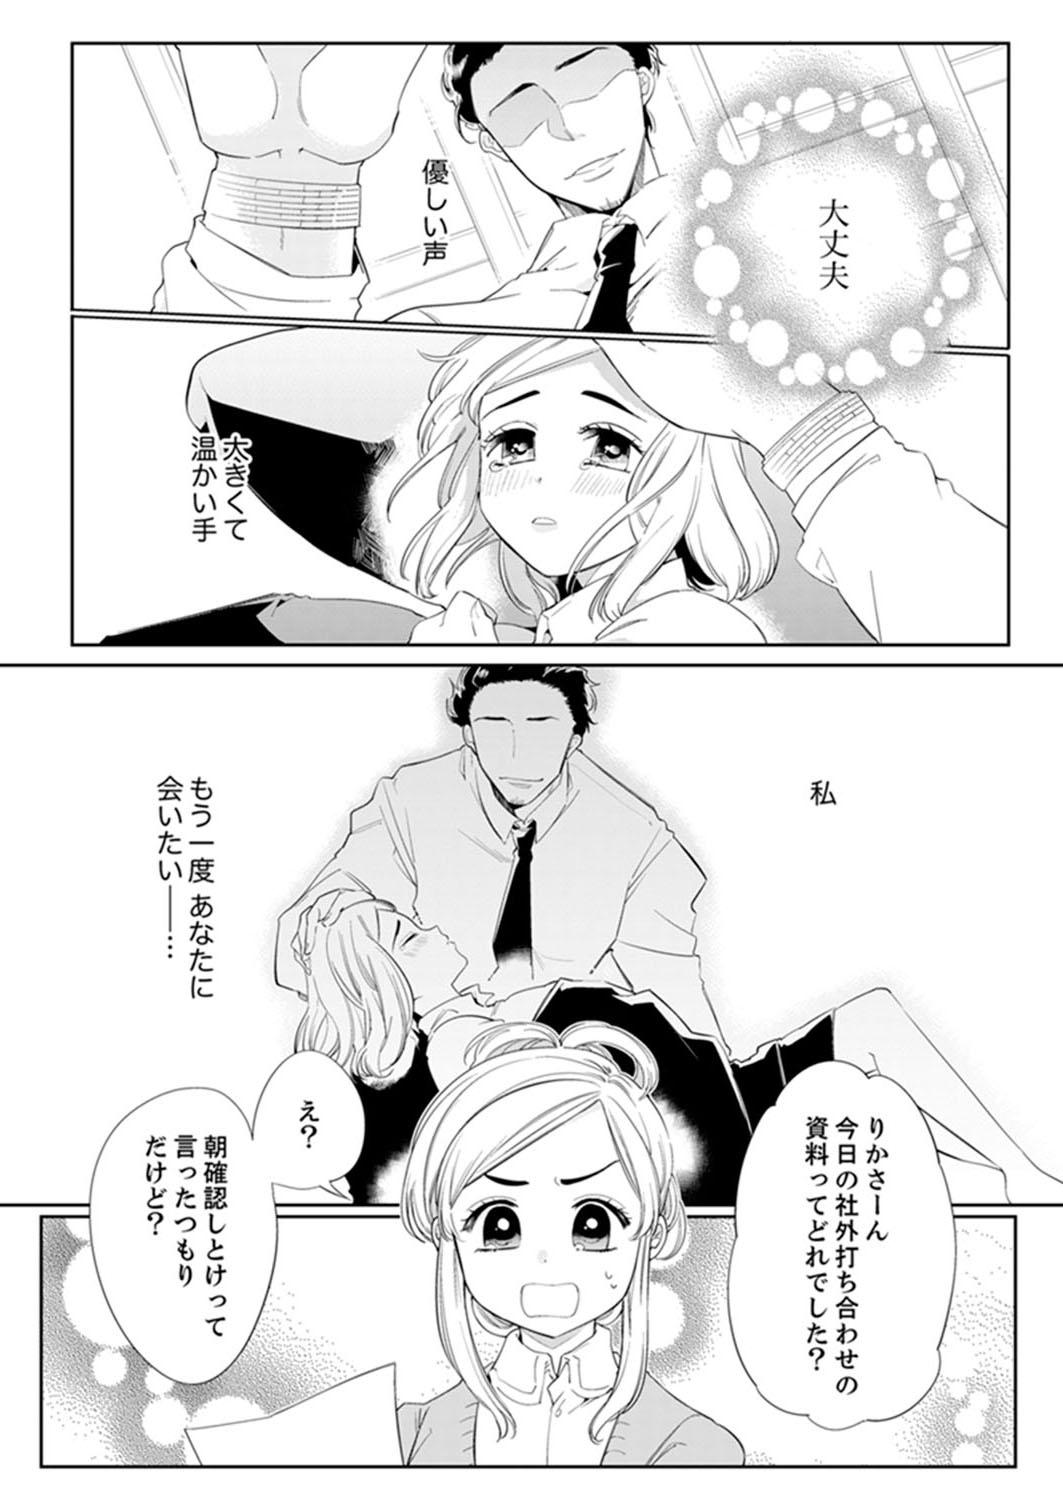 Classic エロ紳士の極上テク～その性感帯、オレが育ててあげる【完全版】 18yearsold - Page 3